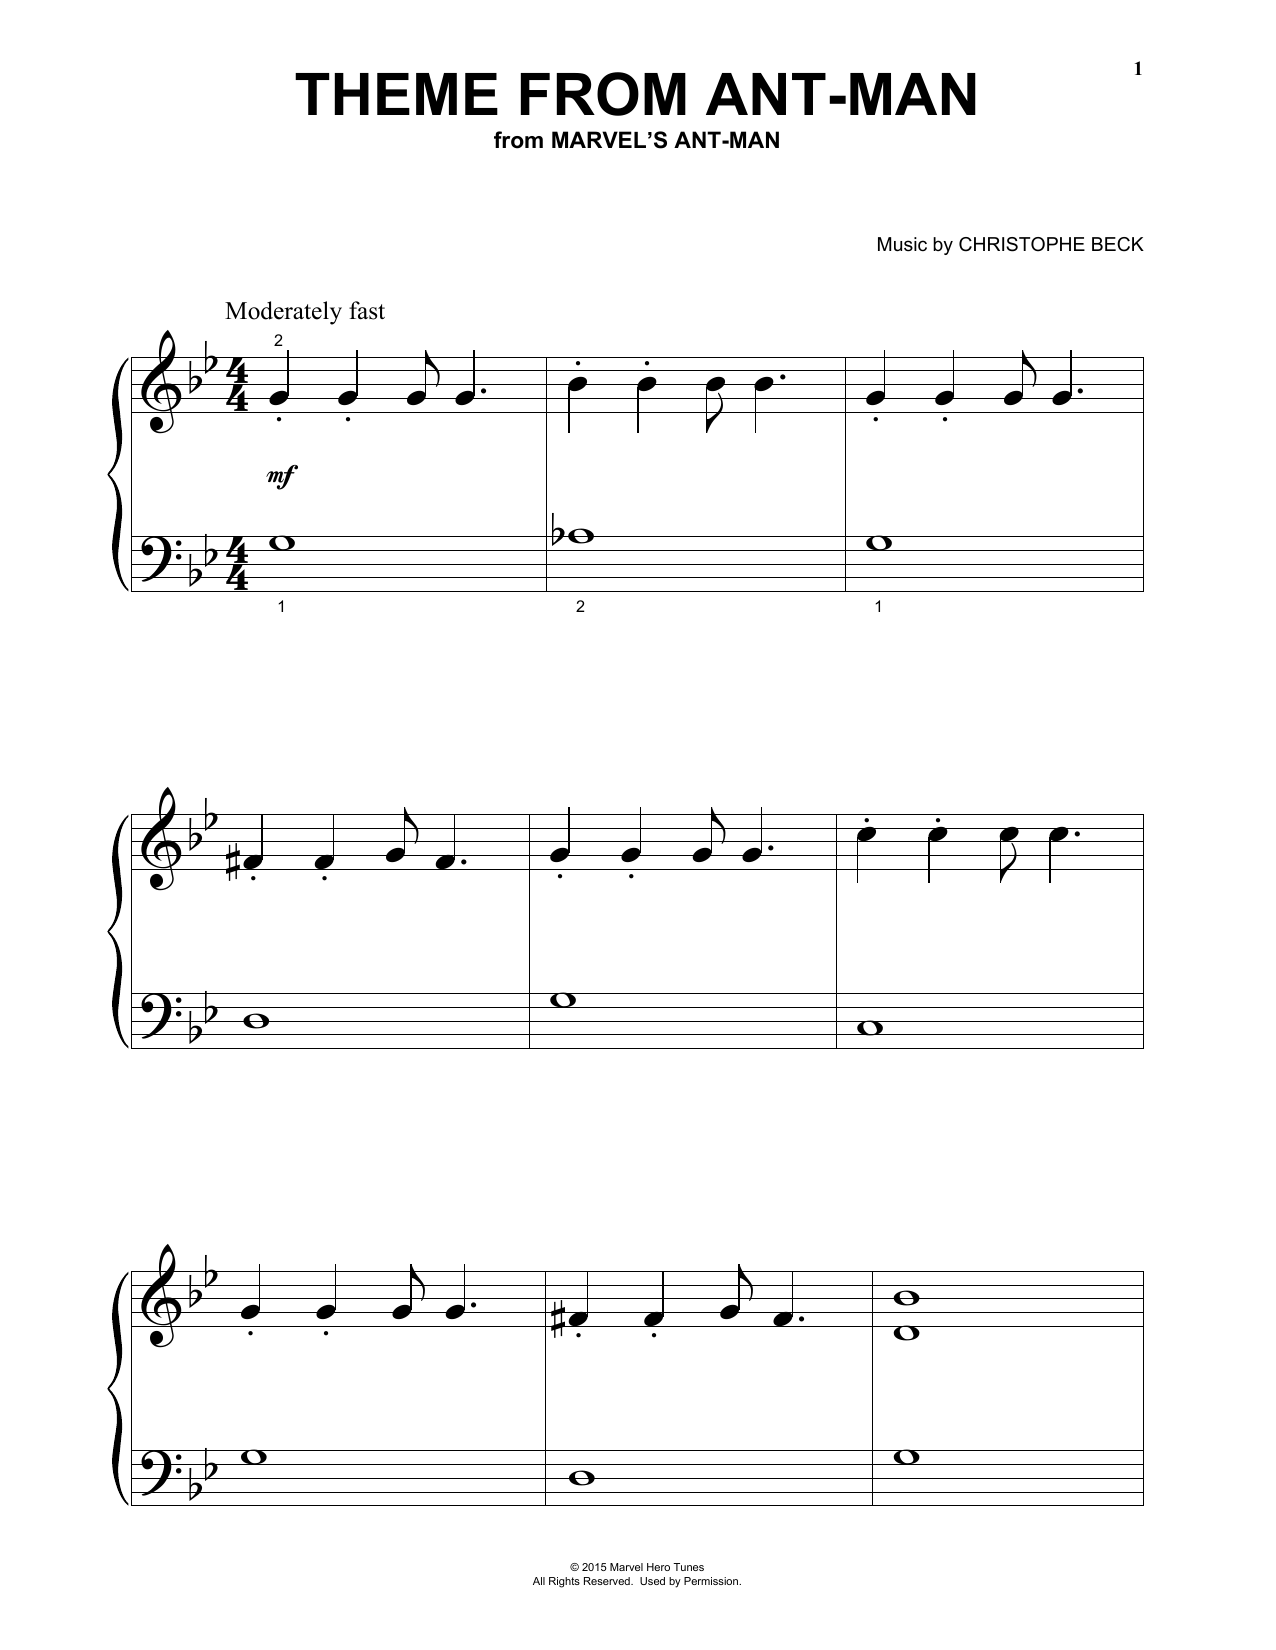 Christophe Beck Theme From Ant-Man sheet music notes and chords. Download Printable PDF.